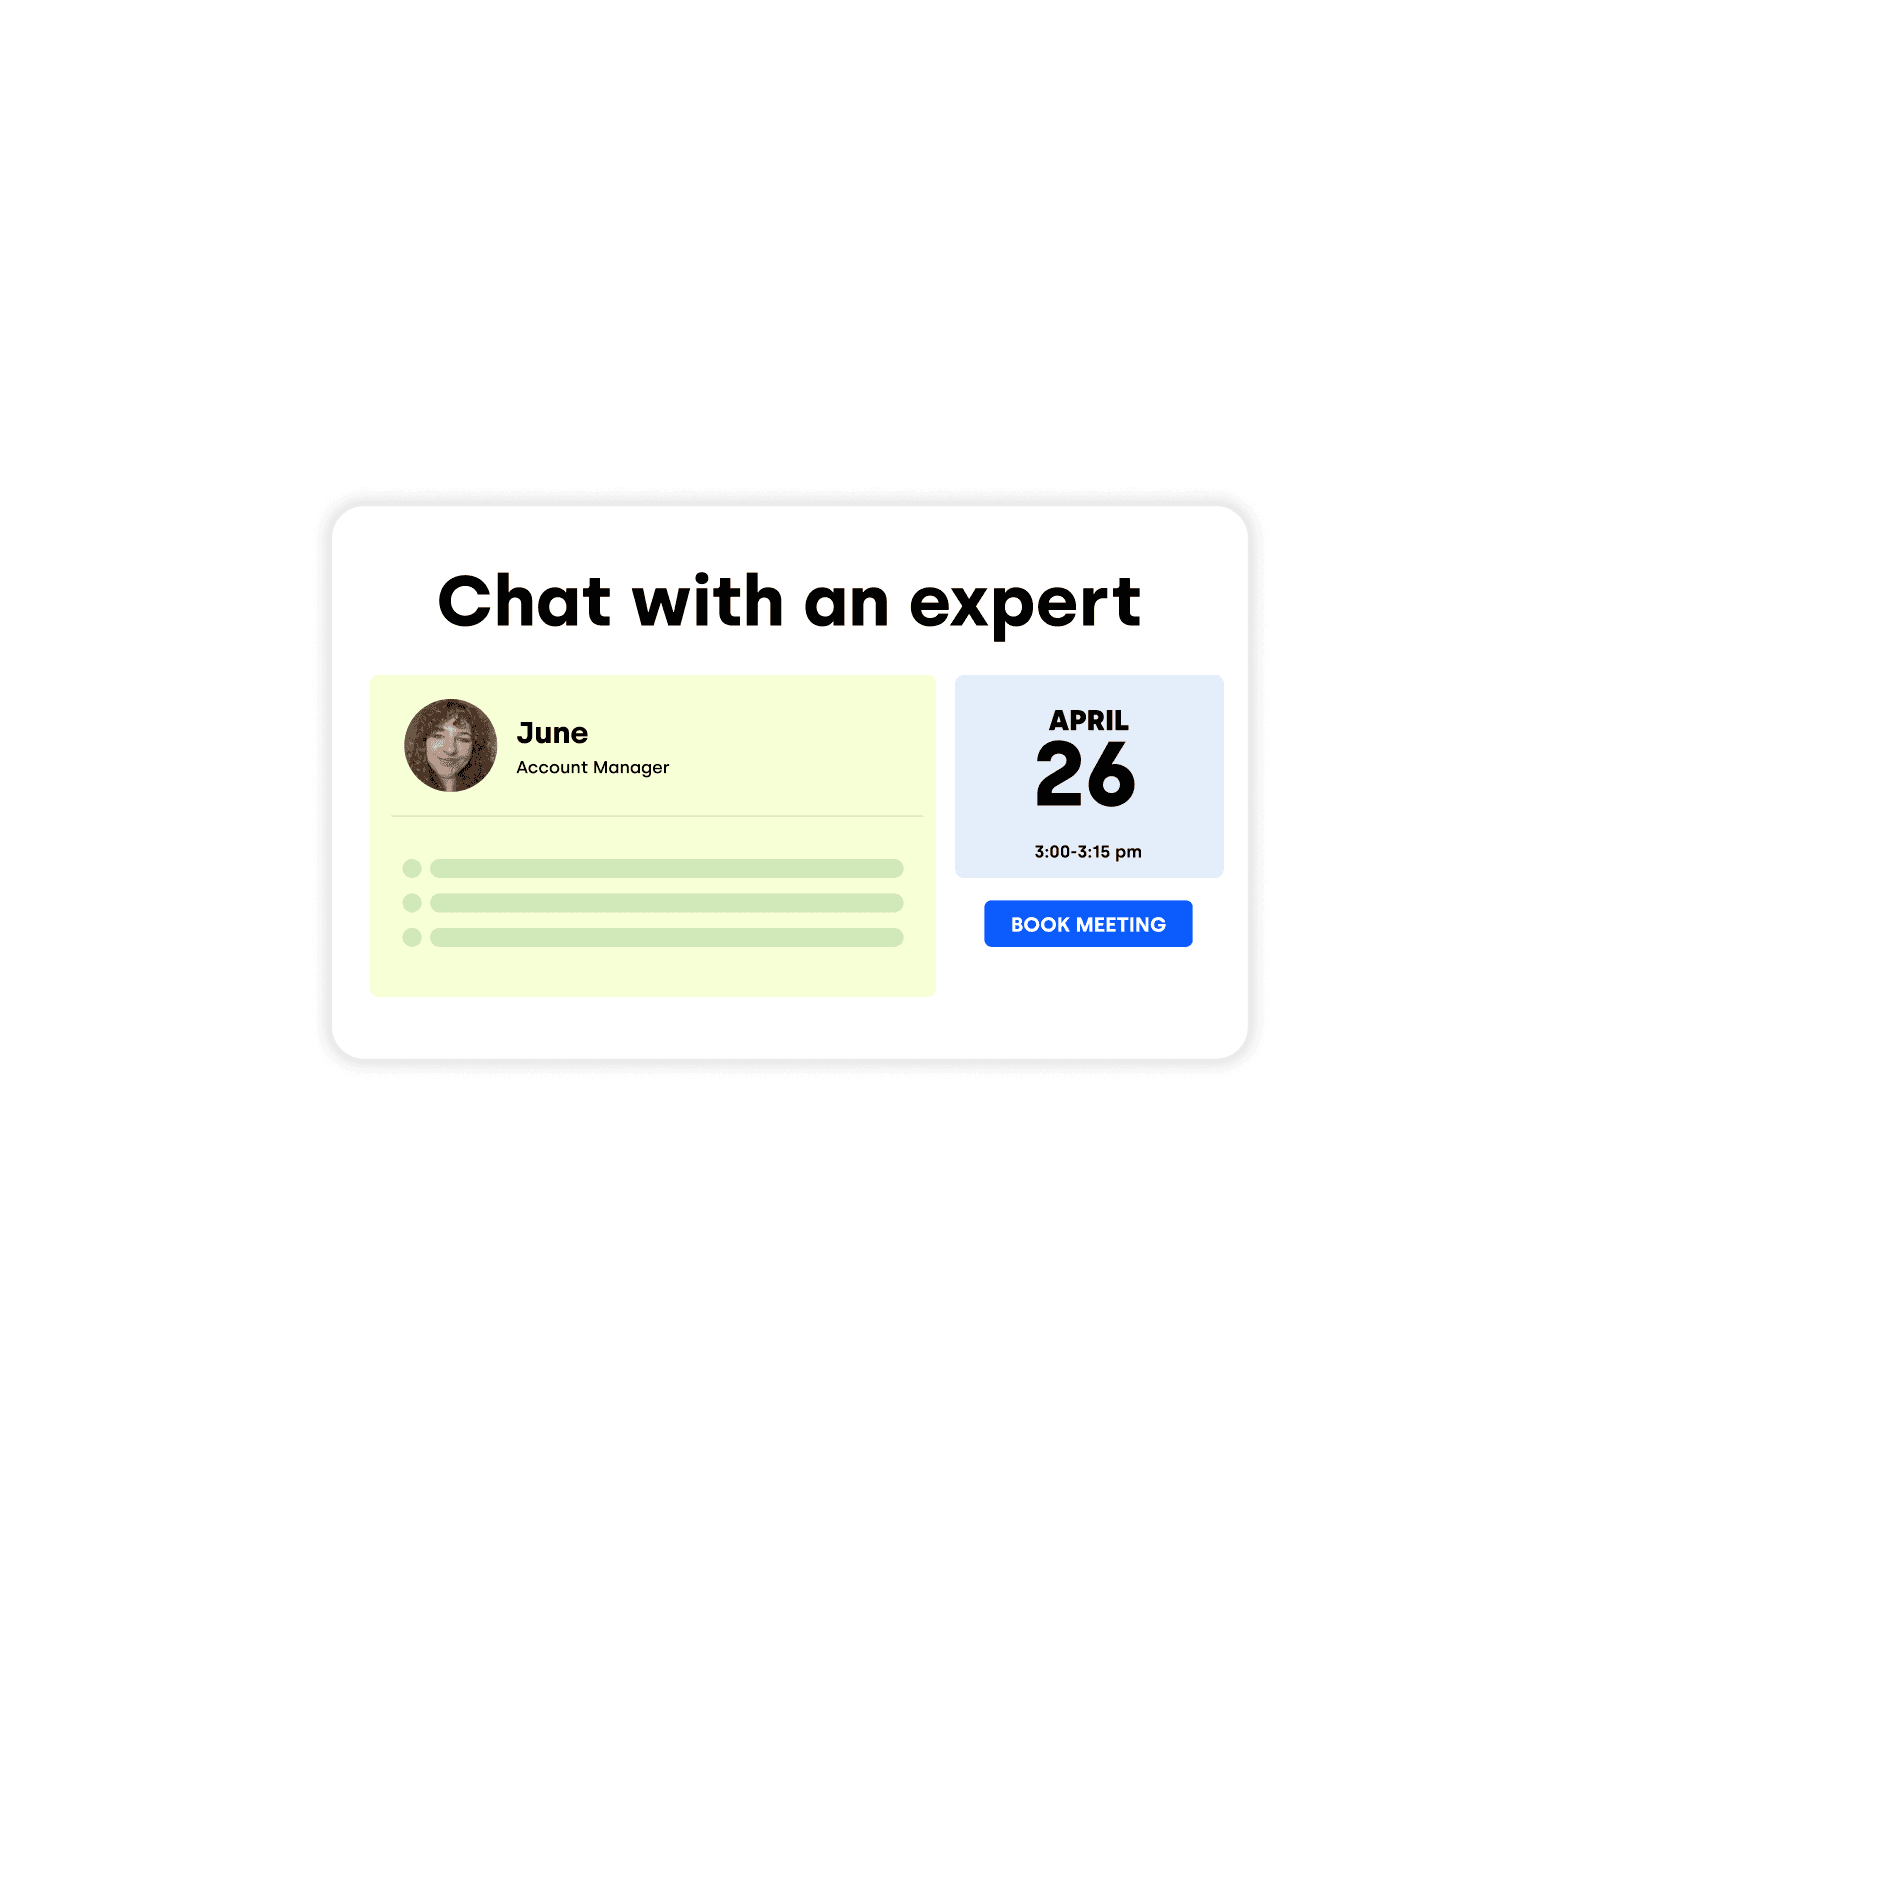 Chat with an expert